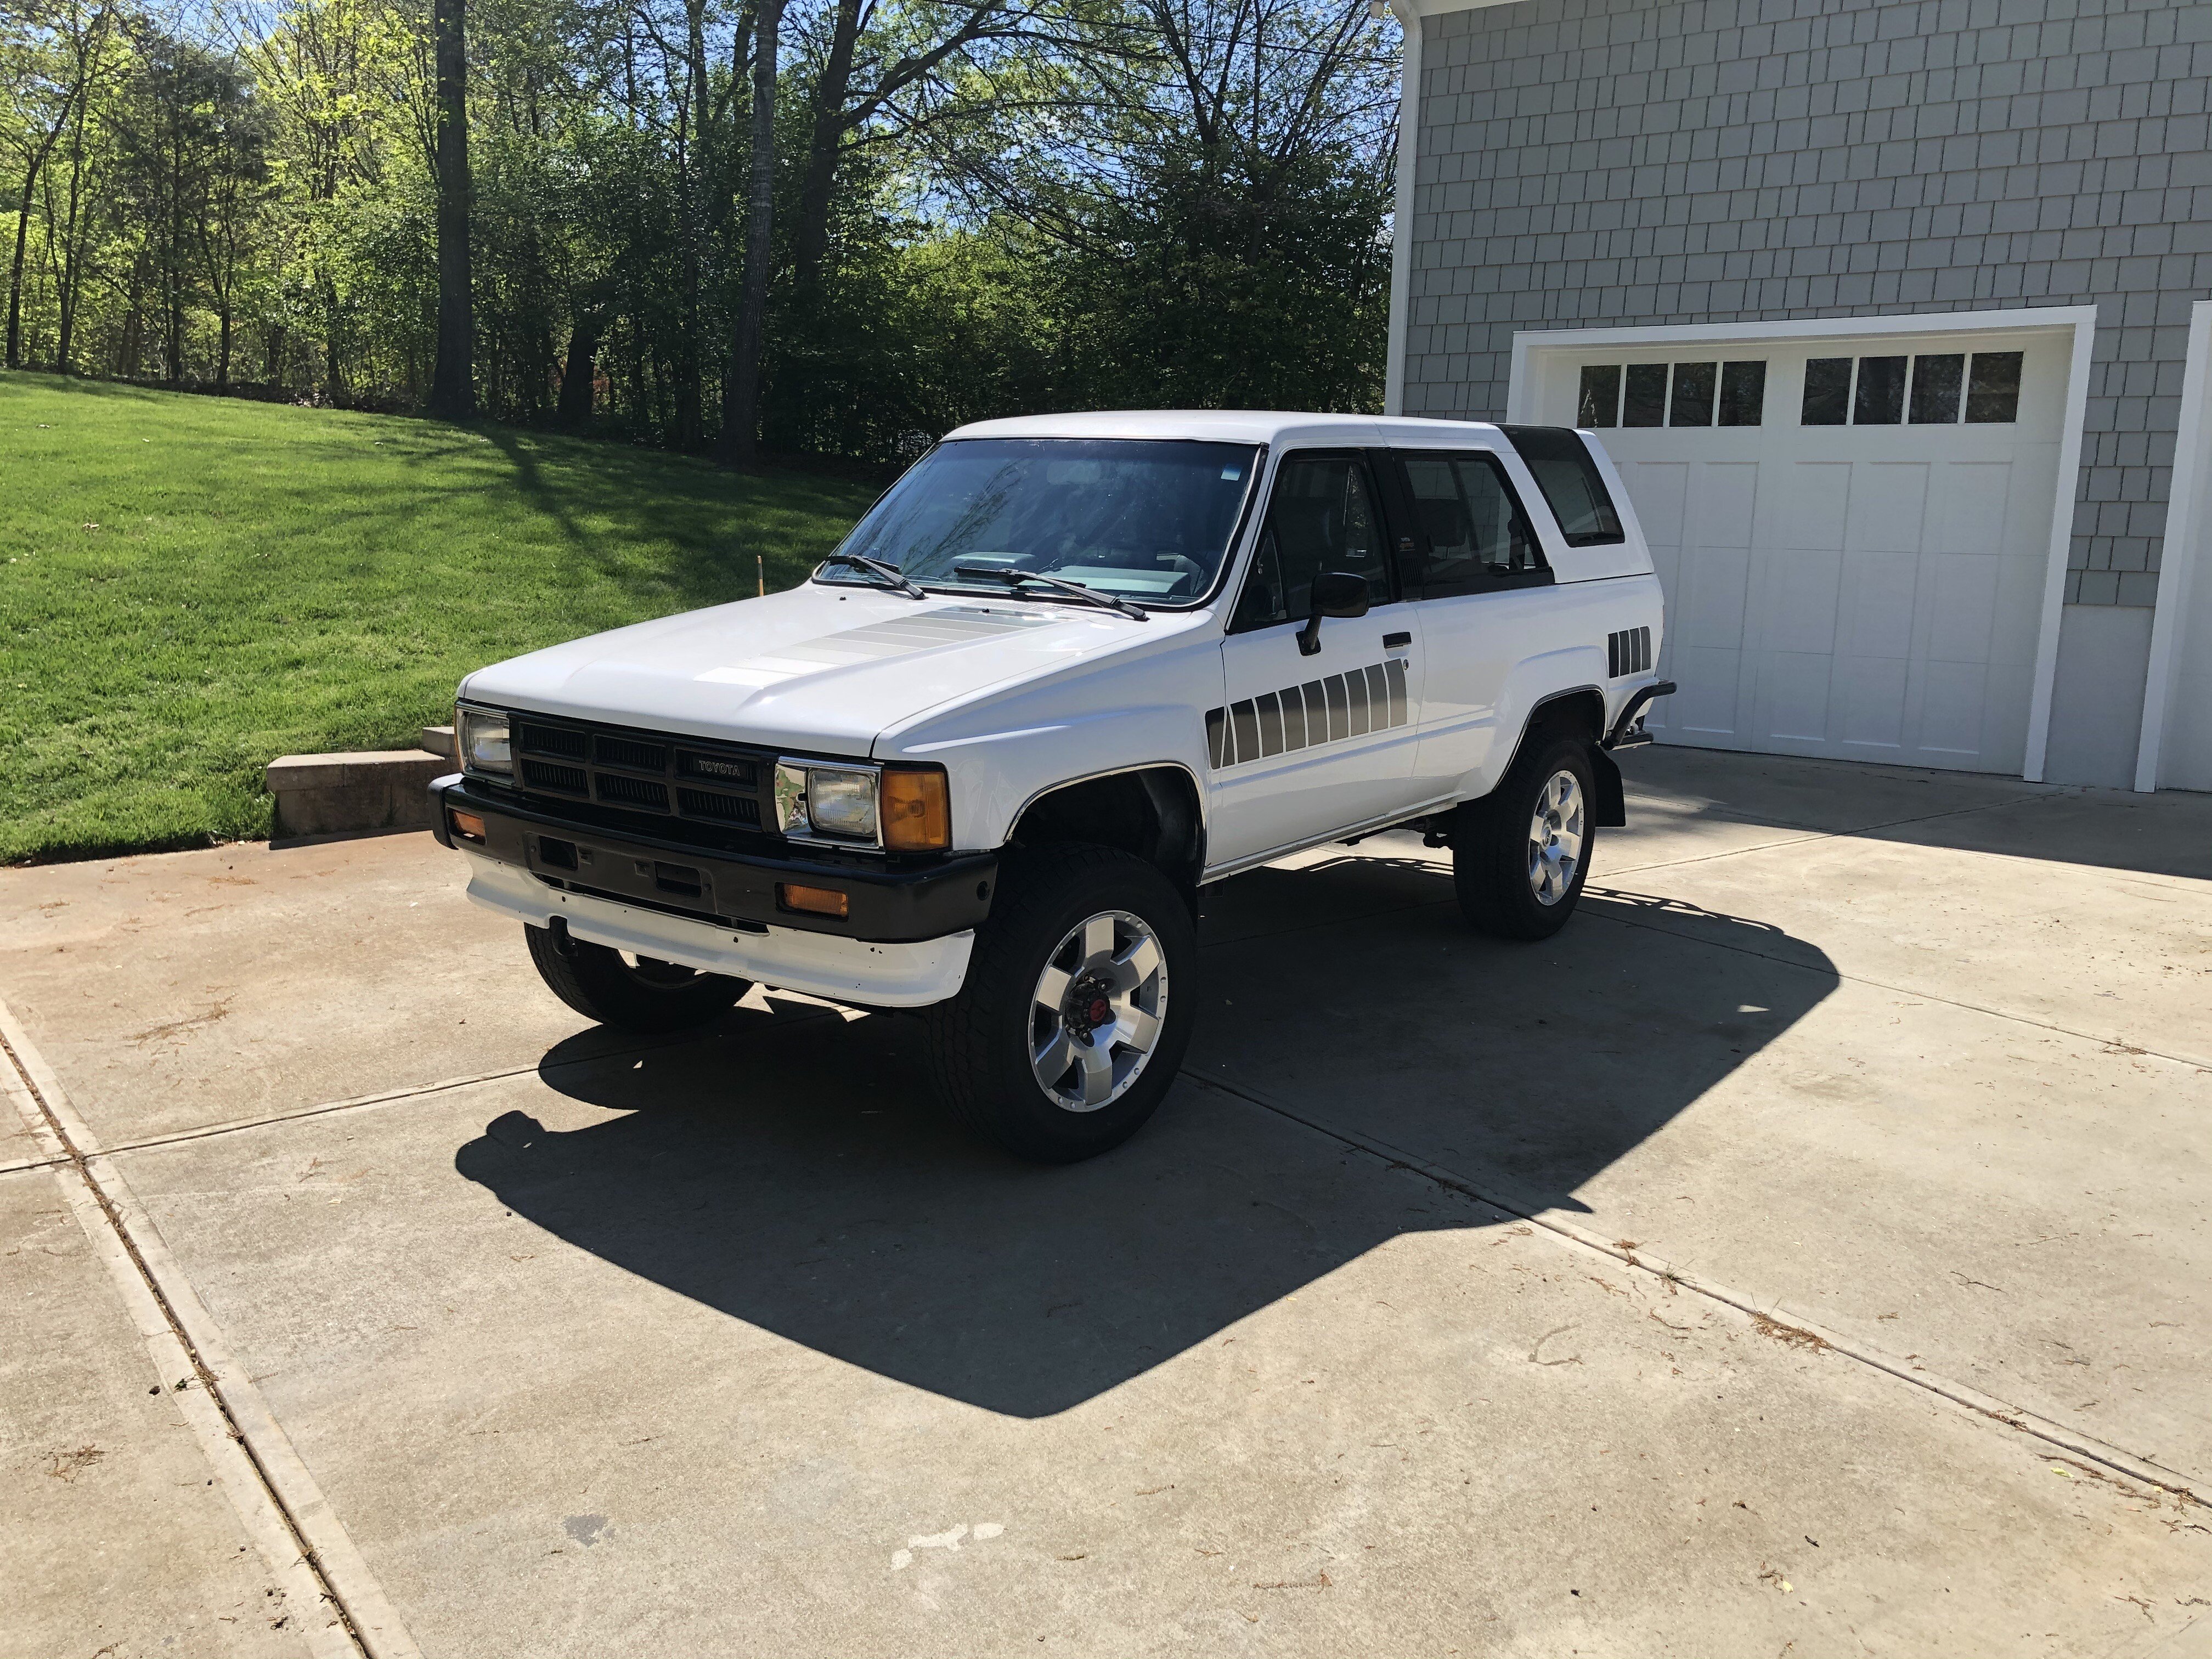 1986 toyota 4runner classics for sale classics on autotrader 1986 toyota 4runner classics for sale classics on autotrader